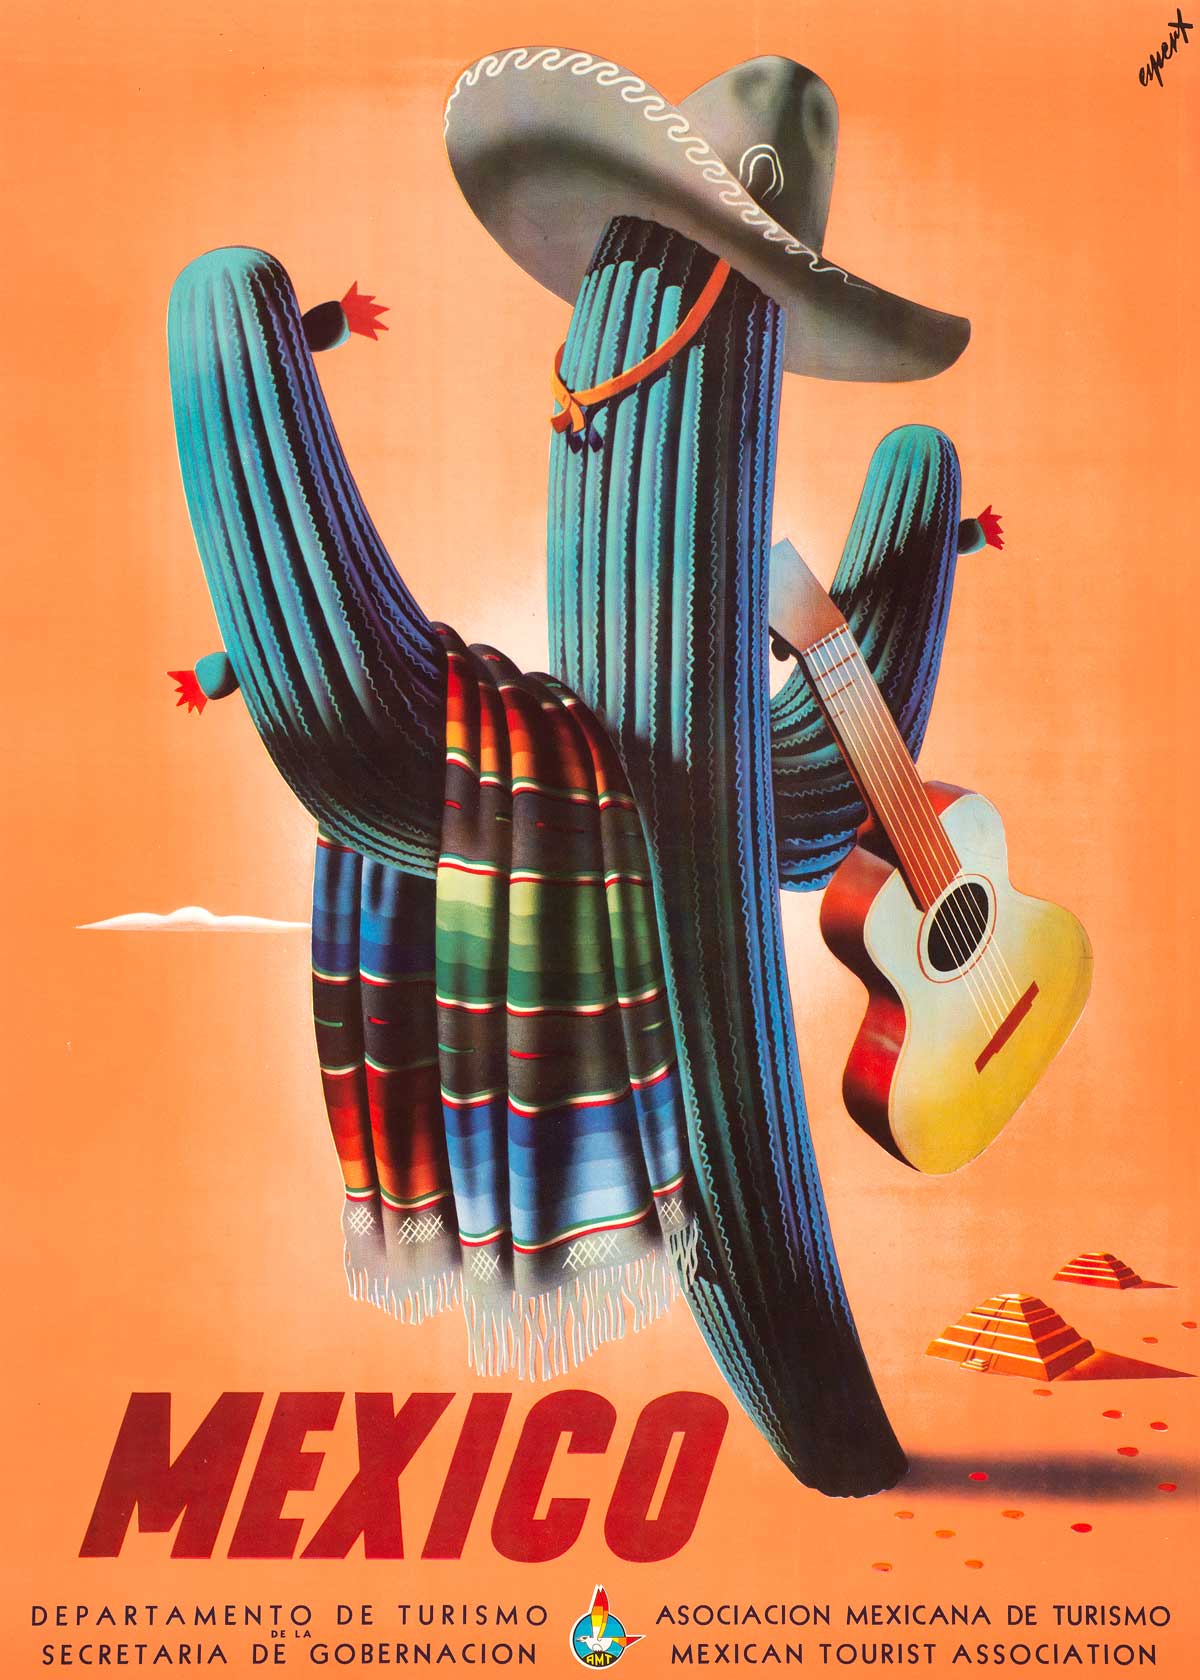 Take home a little bit of Mexico with vintage travel postcards